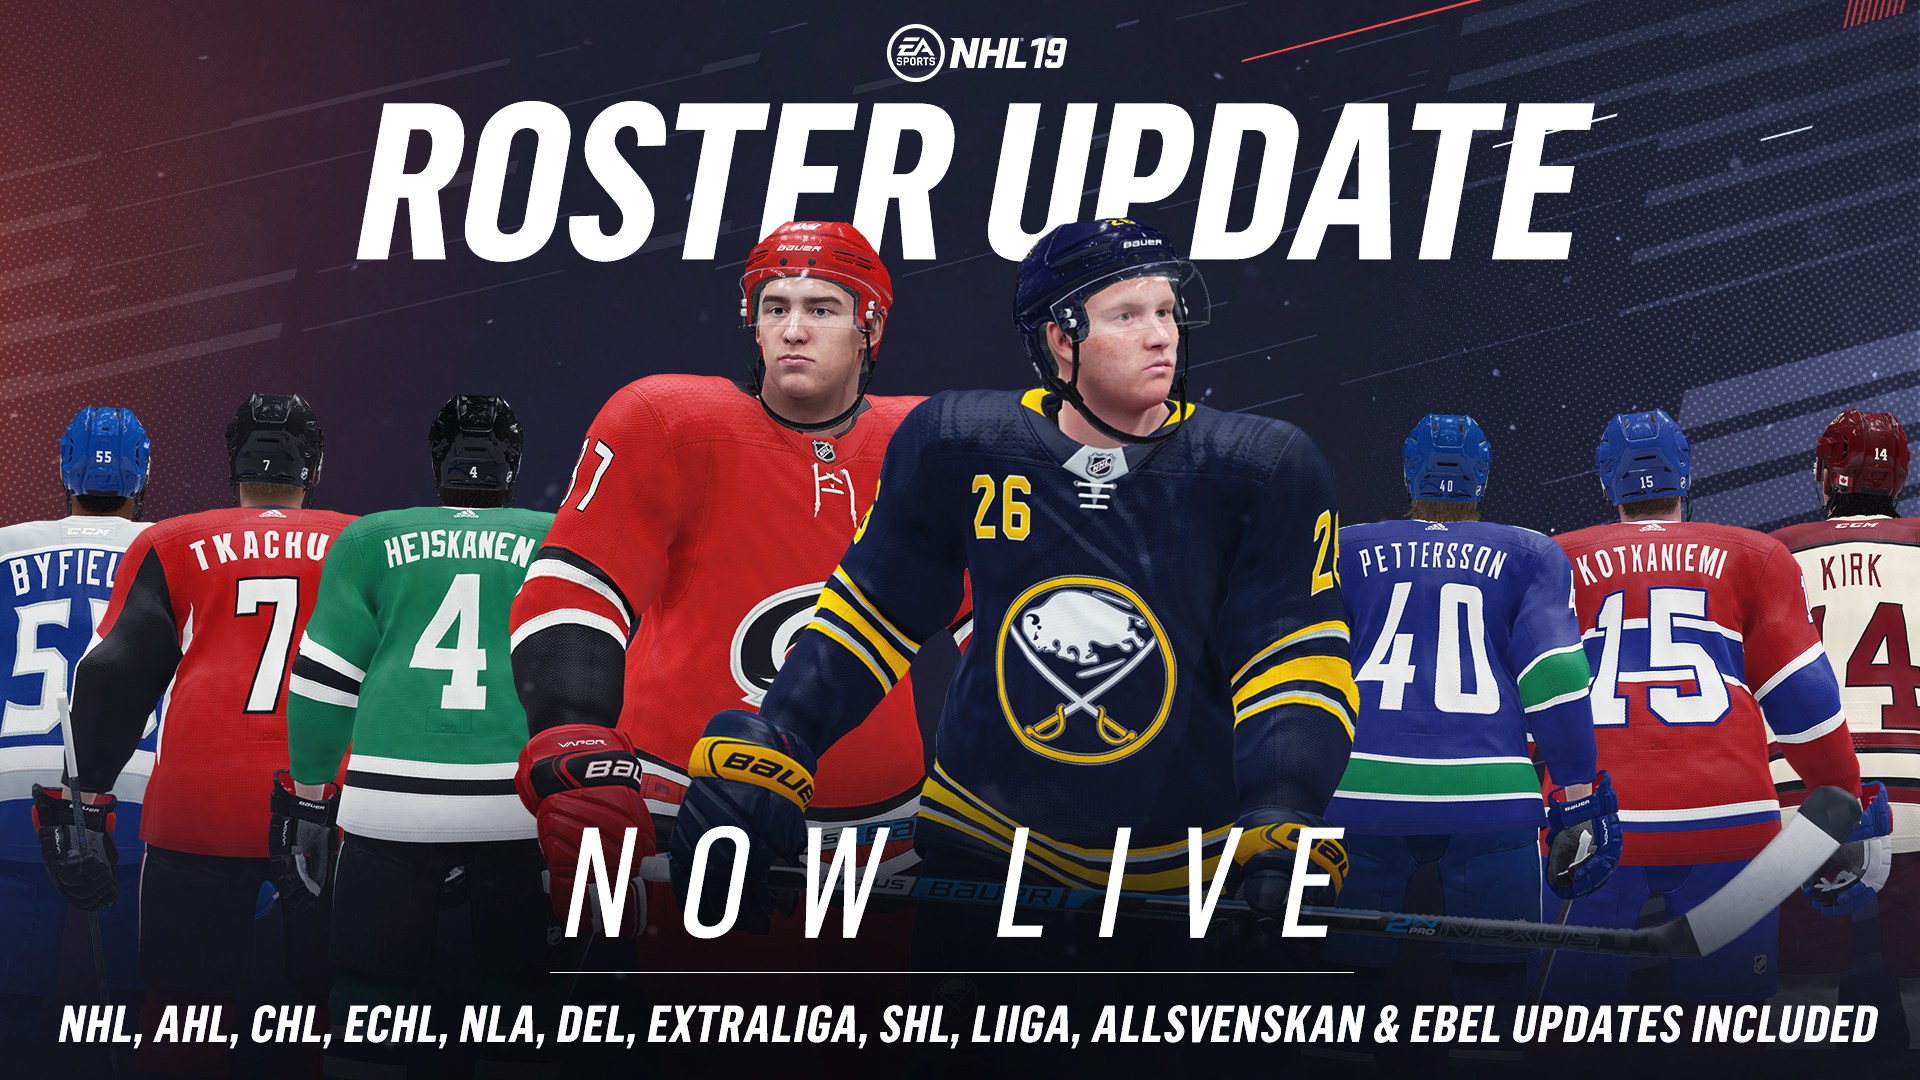 nhl 17 next roster update